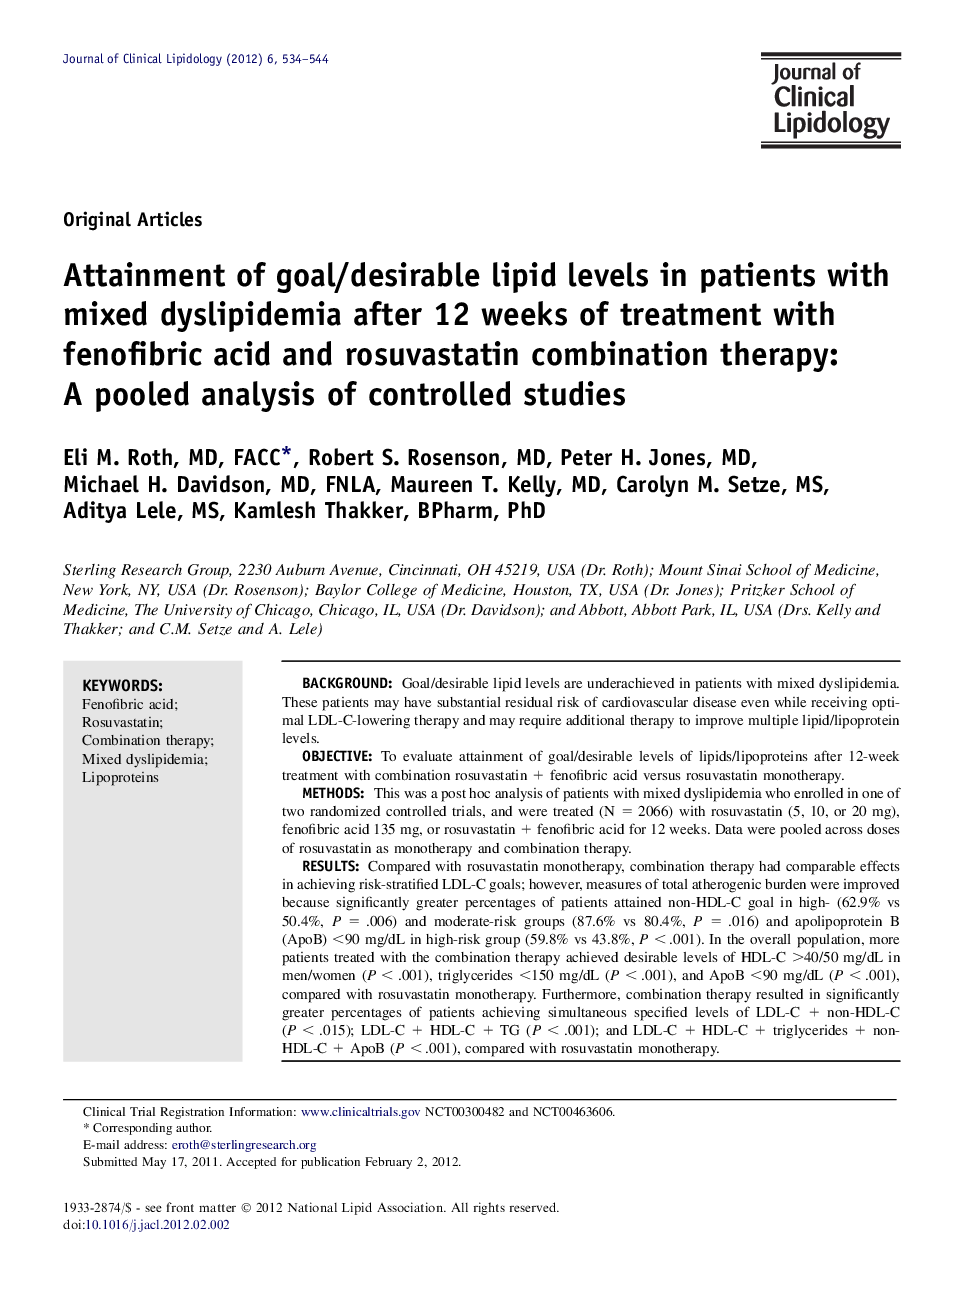 Attainment of goal/desirable lipid levels in patients with mixed dyslipidemia after 12 weeks of treatment with fenofibric acid and rosuvastatin combination therapy: A pooled analysis of controlled studies